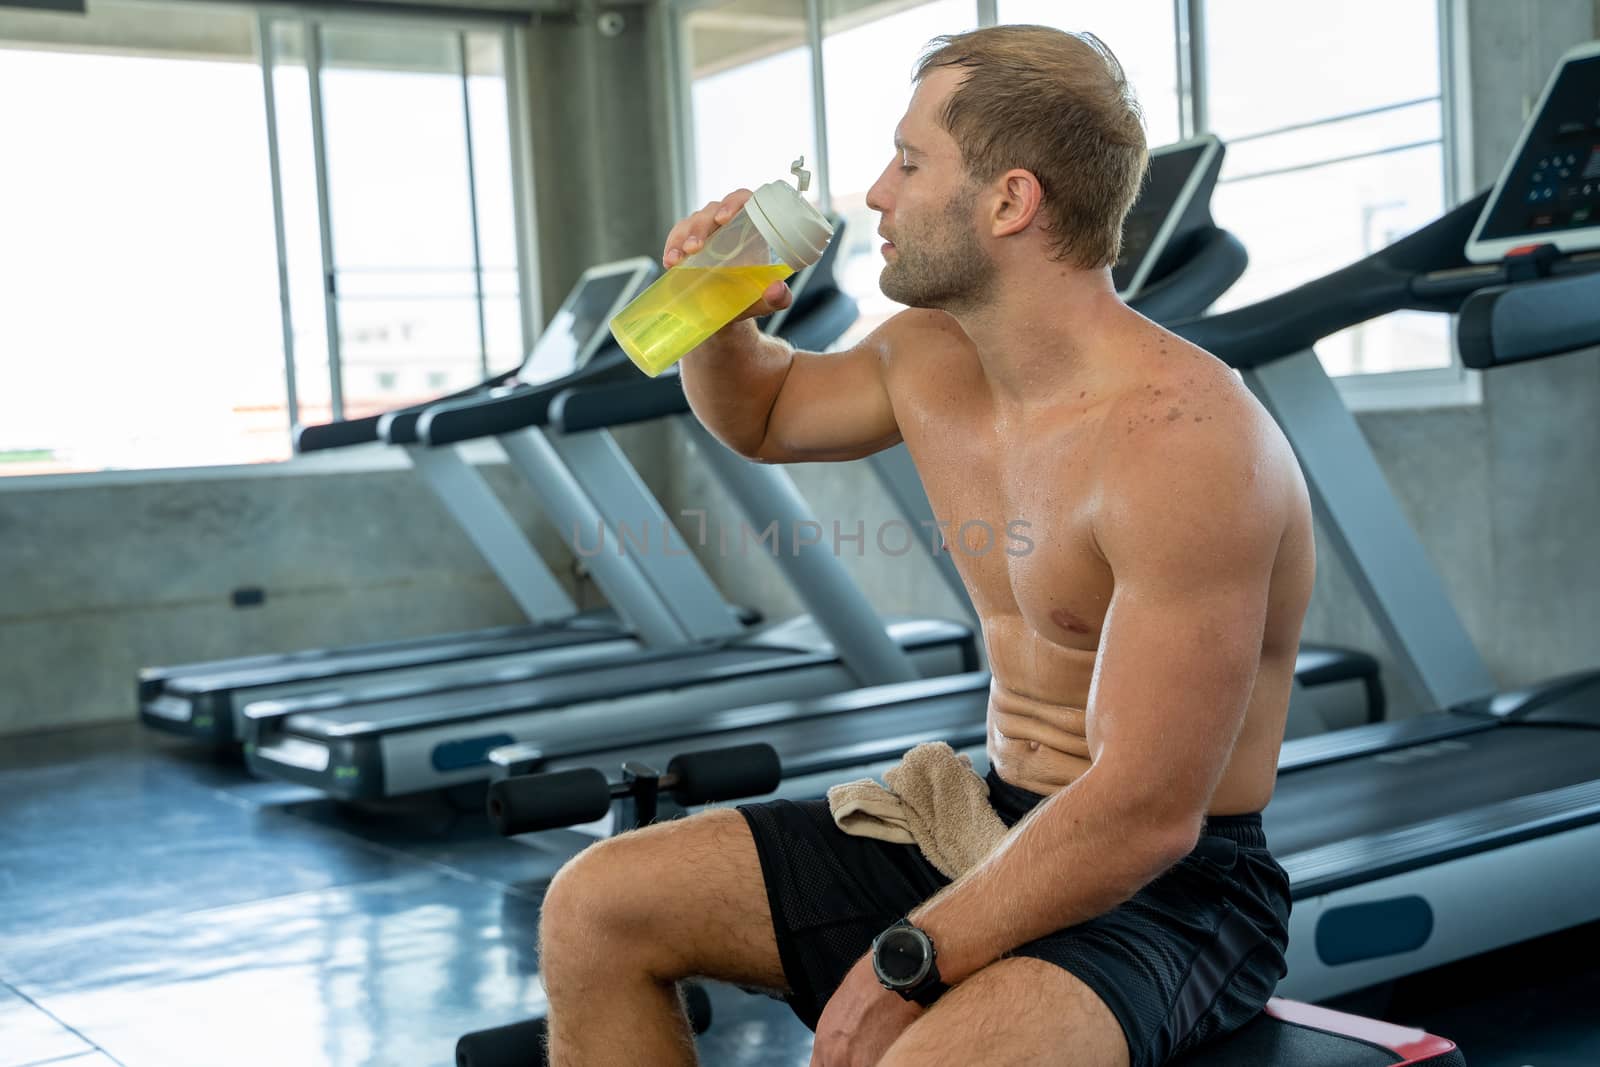 Fitness man raise water bottles and drink after exercising in gym,Man having a break drinking a bottle of water.